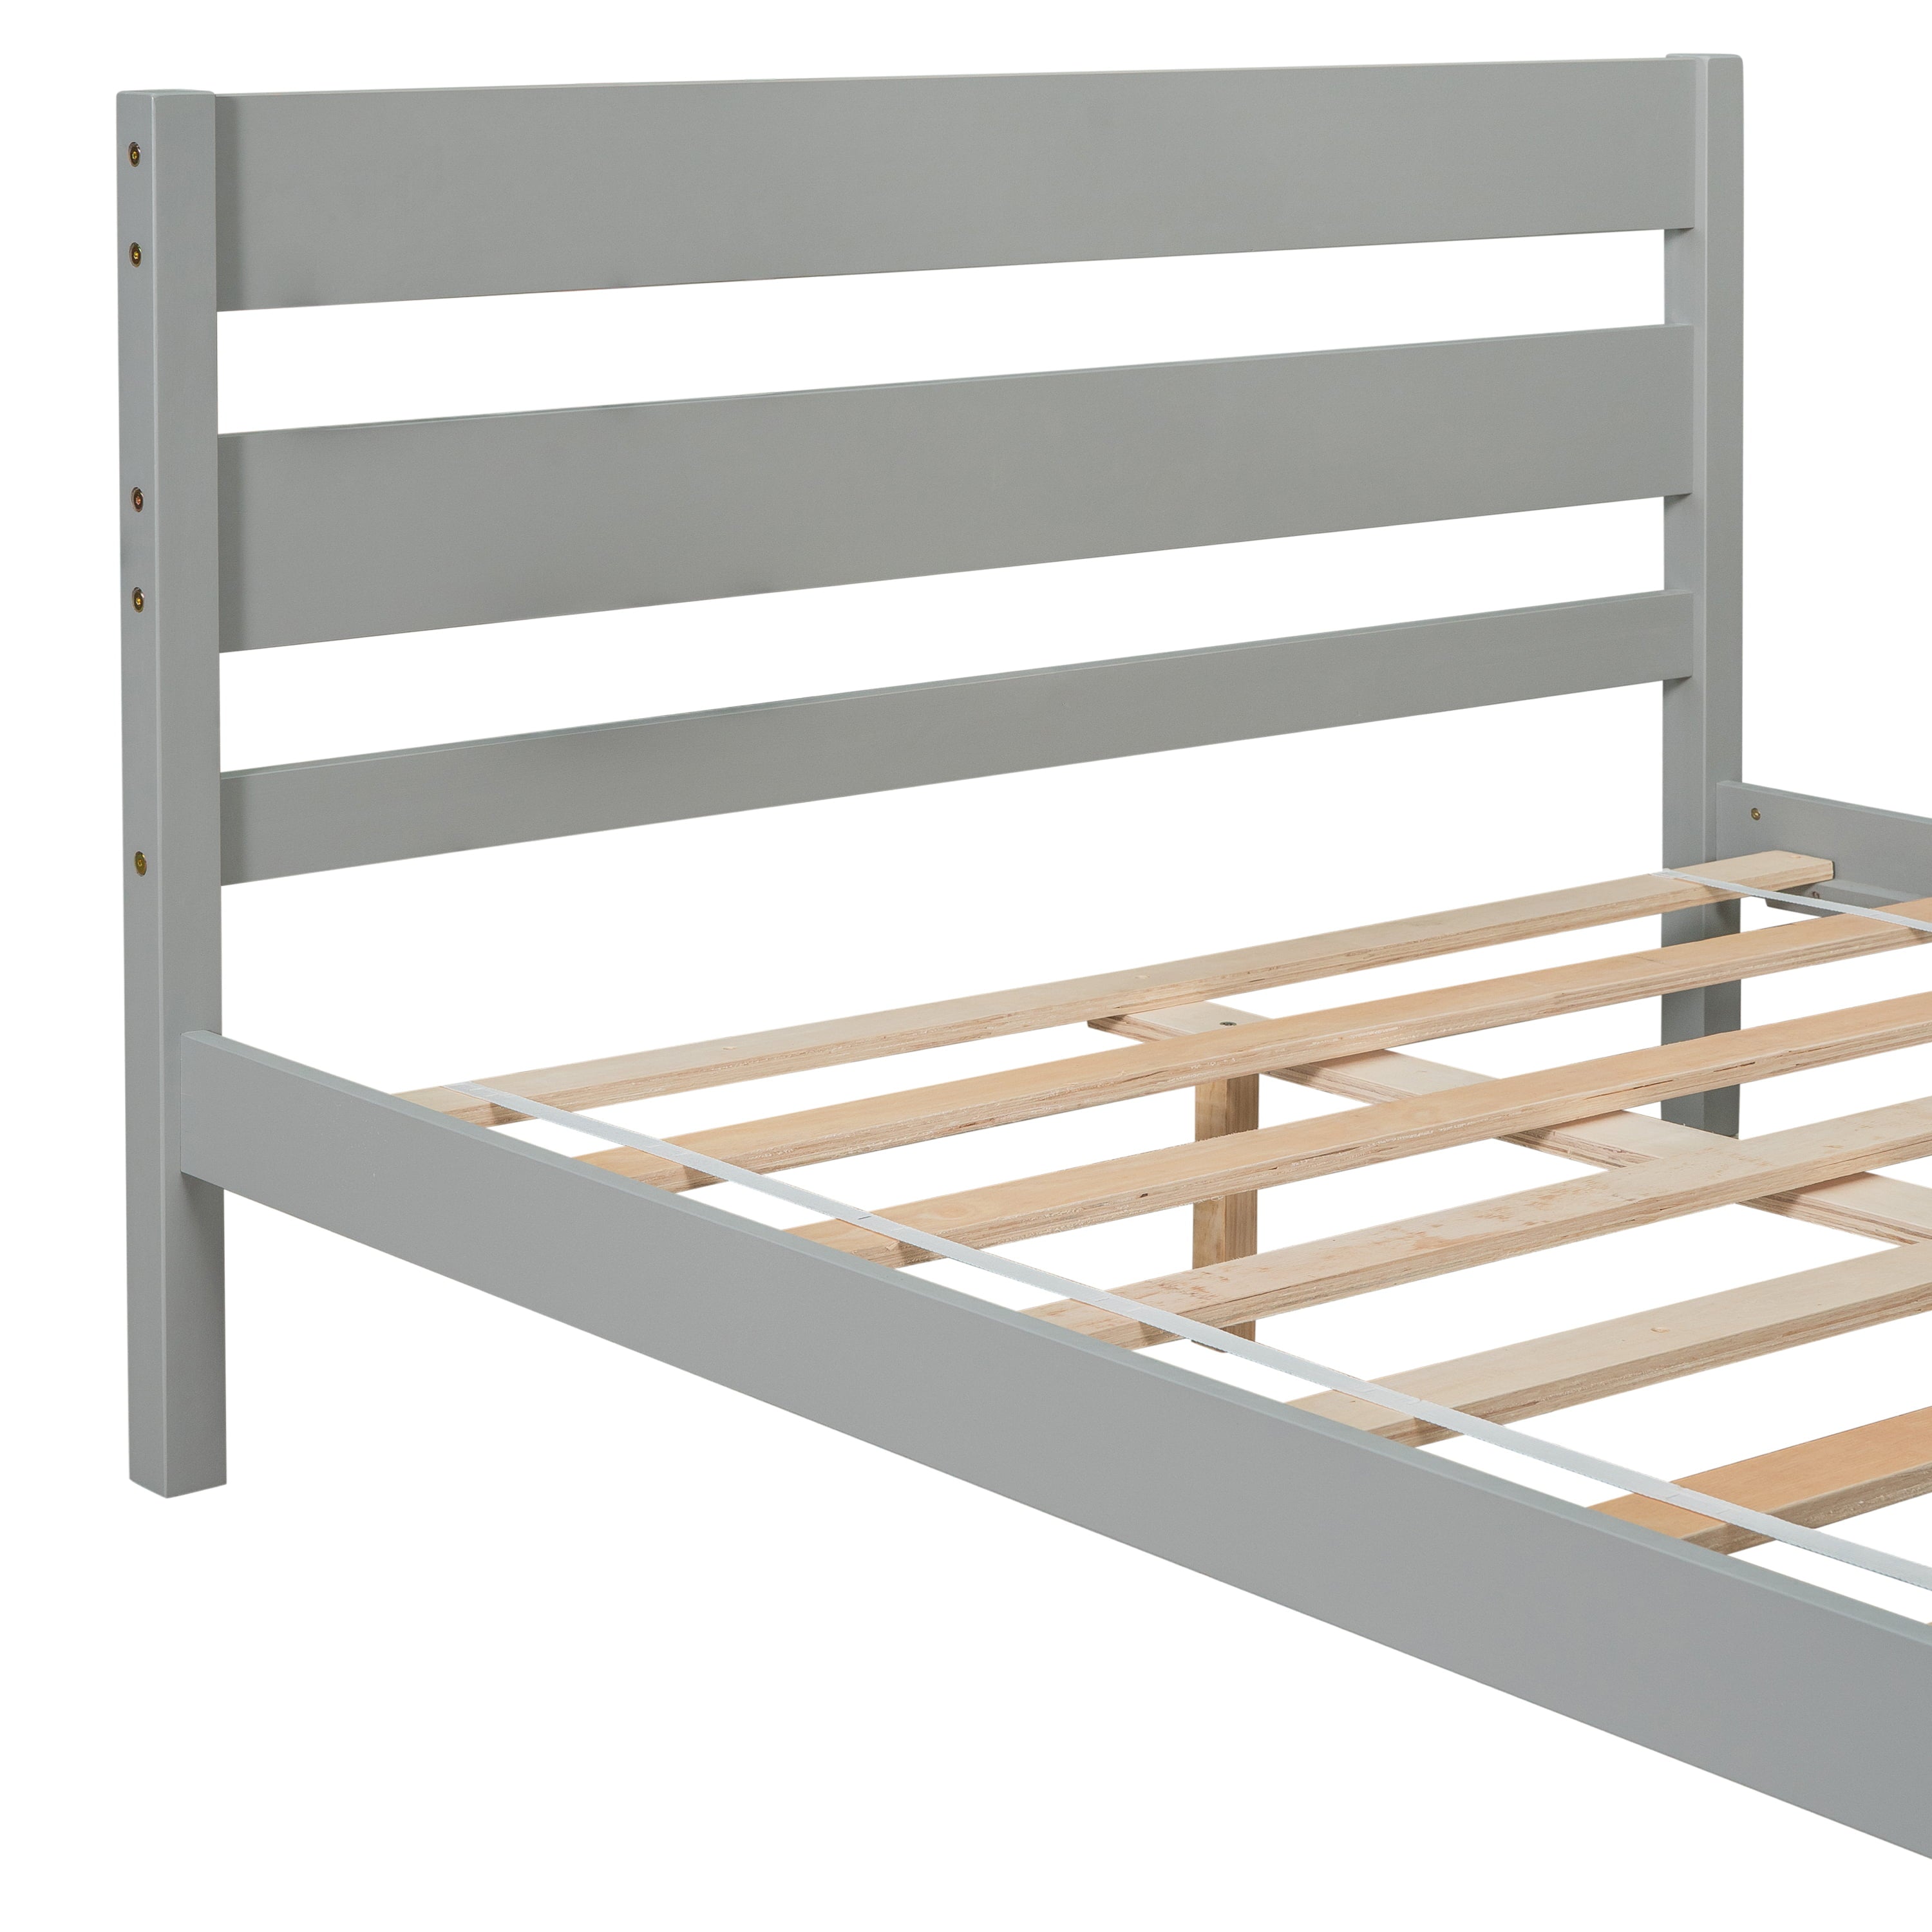 BTMWAY Full Bed Frame with Headboard and Footboard, Modern Wood Platform Bed for Kids Teens Adults, Strong Wooden Slats Support, Full Size Bed Frame No Box Spring Needed, Gray